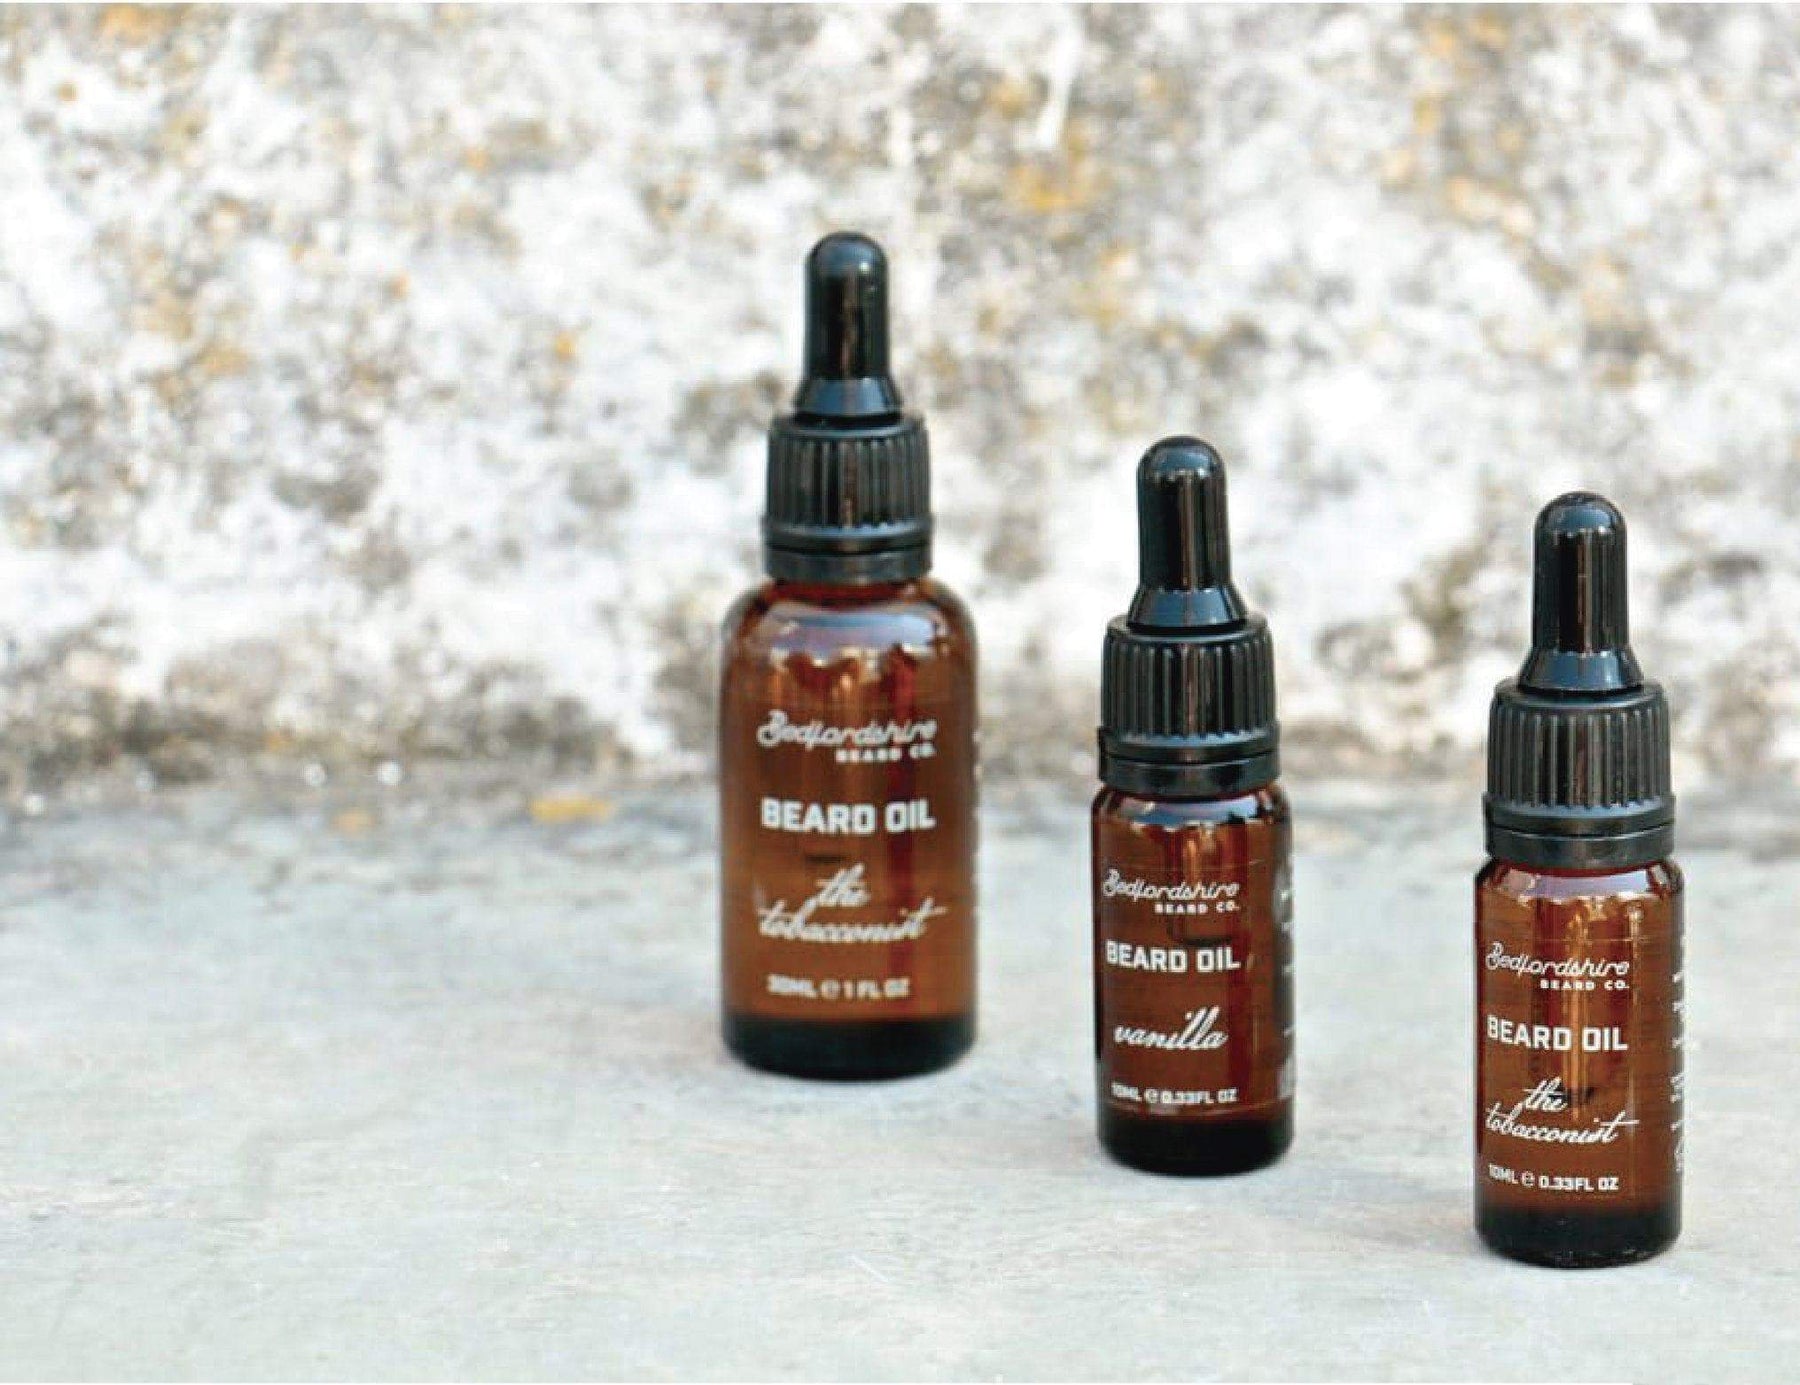 Beard Oil | Why you should choose natural product